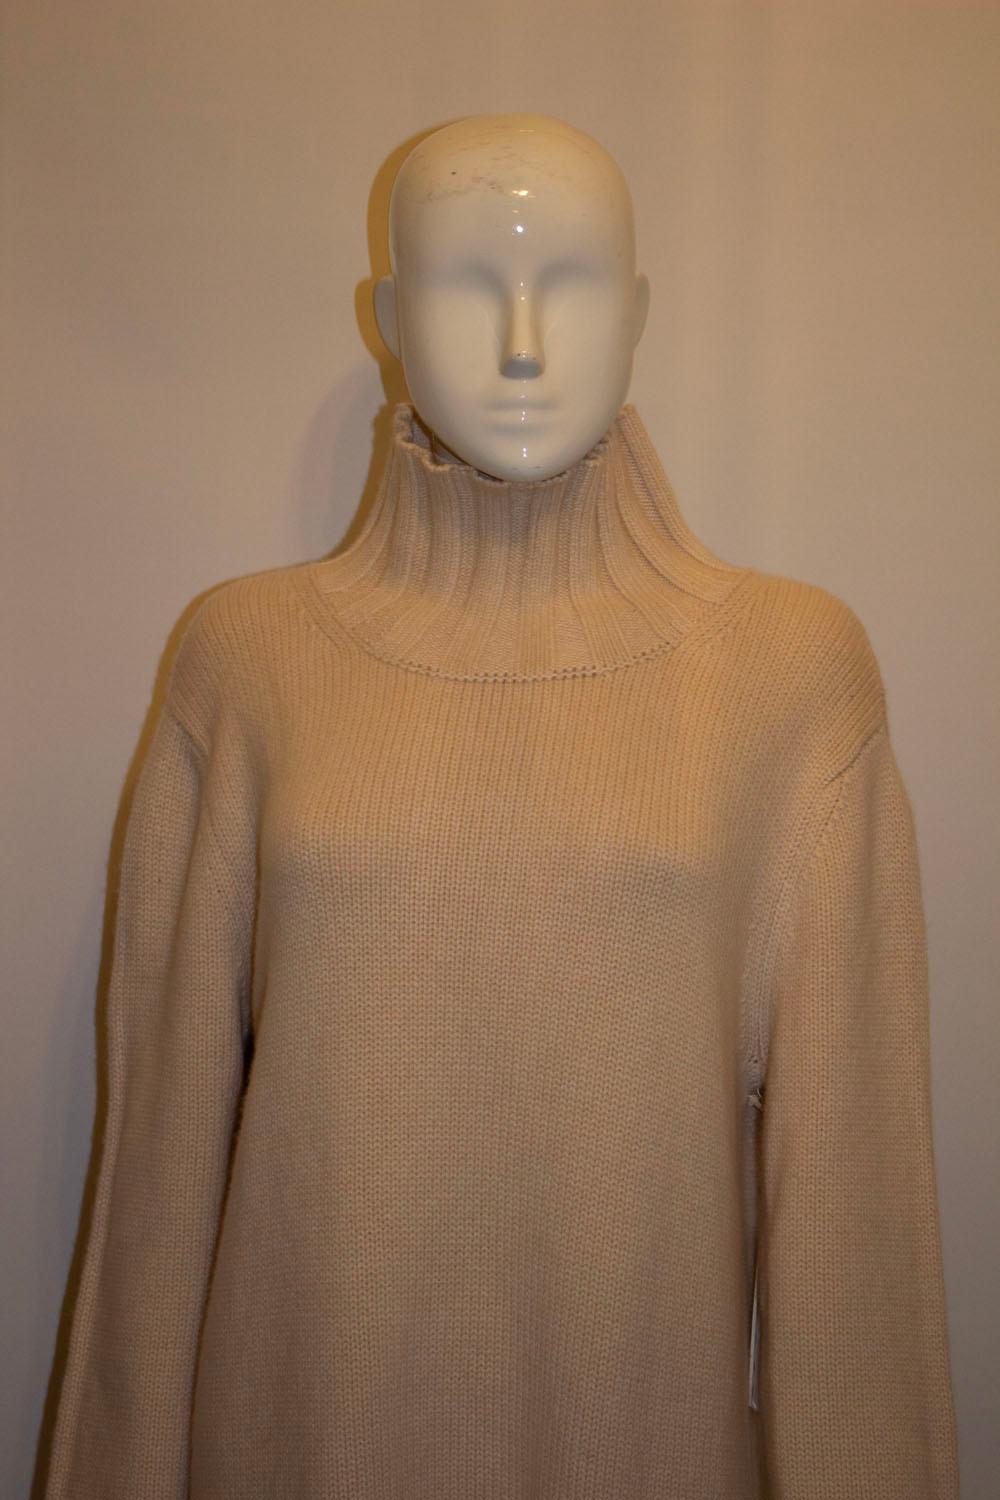   Khaite, Wonderful Cashmere Tunic /Jumper In Good Condition For Sale In London, GB